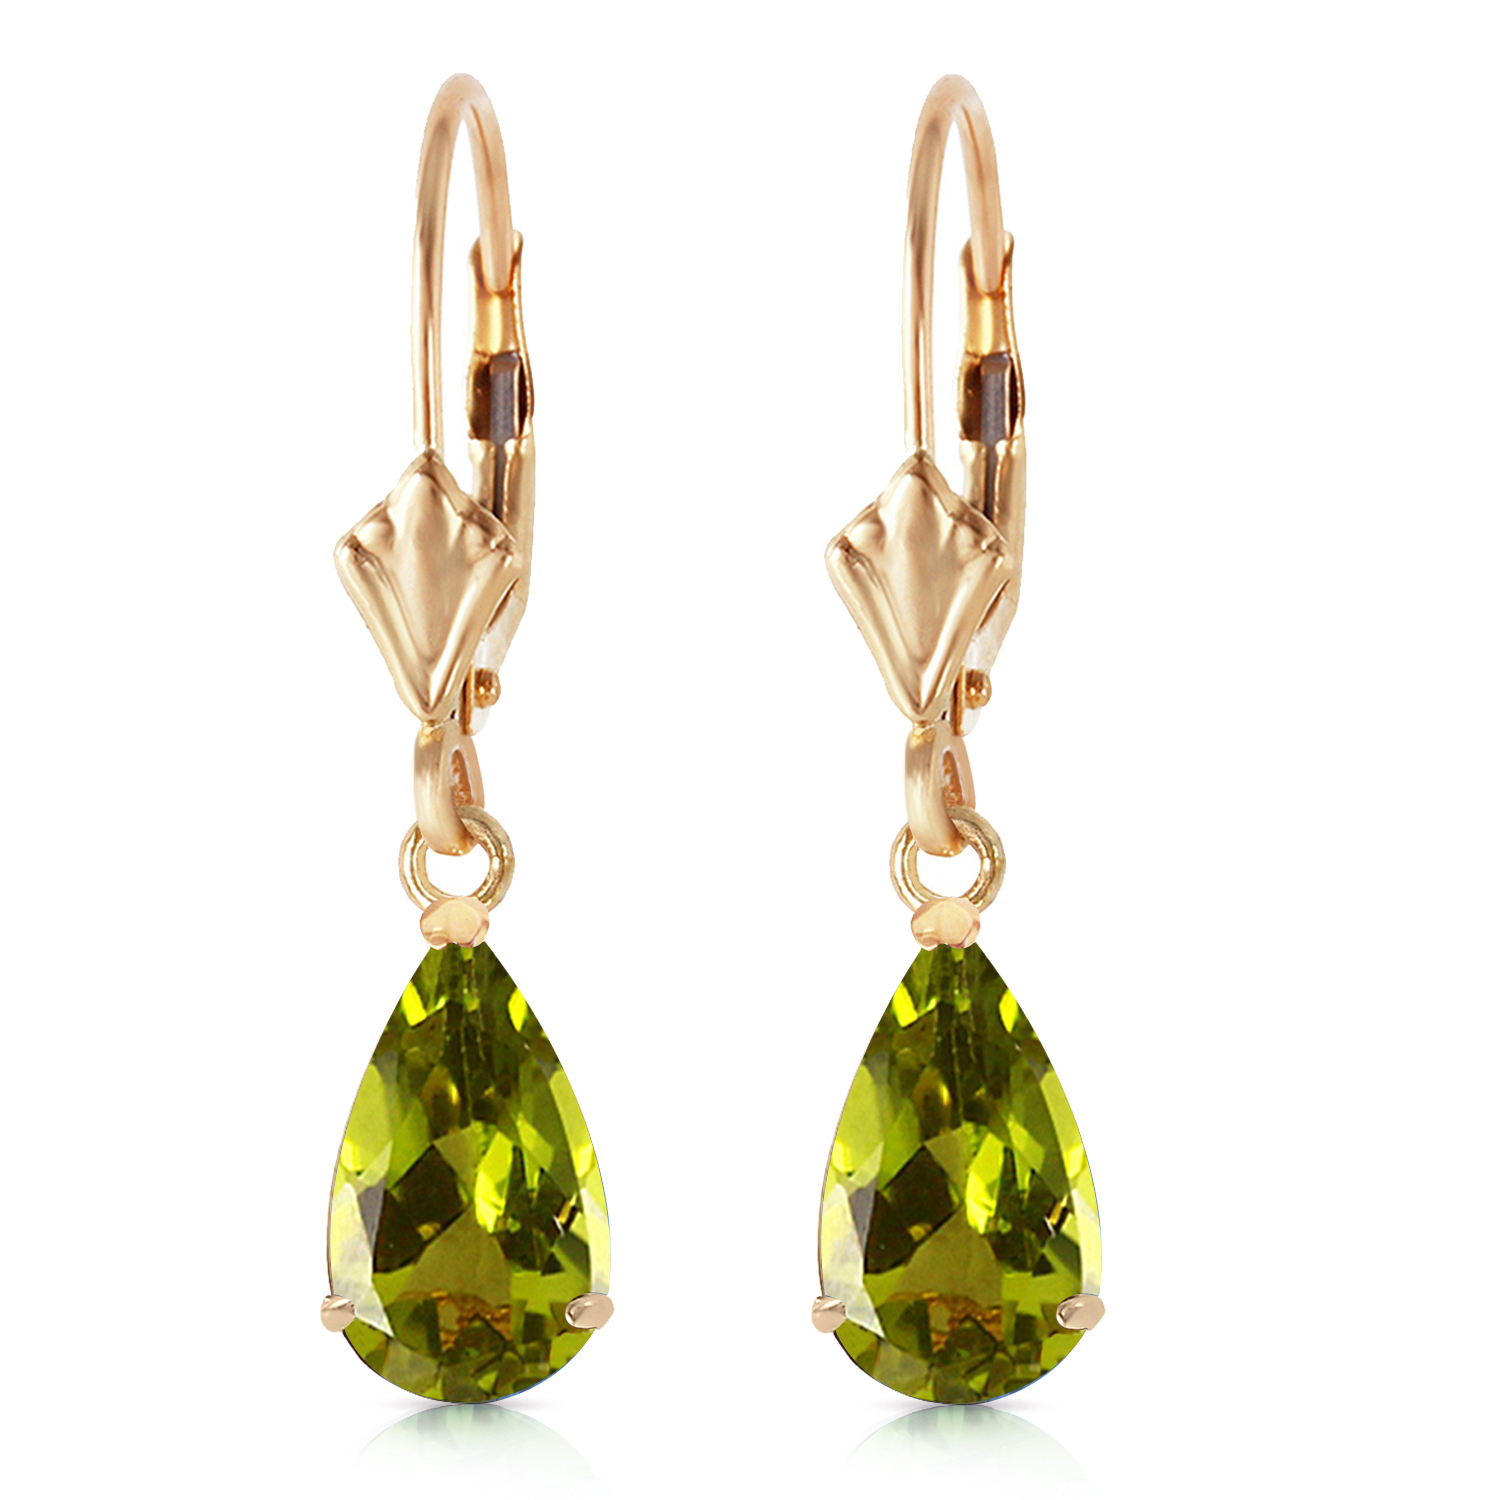 Galaxy Gold Genuine 14k Solid Yellow Gold Earrings Design with 3 Carat Green Grass Peridot Gemstones - image 2 of 3